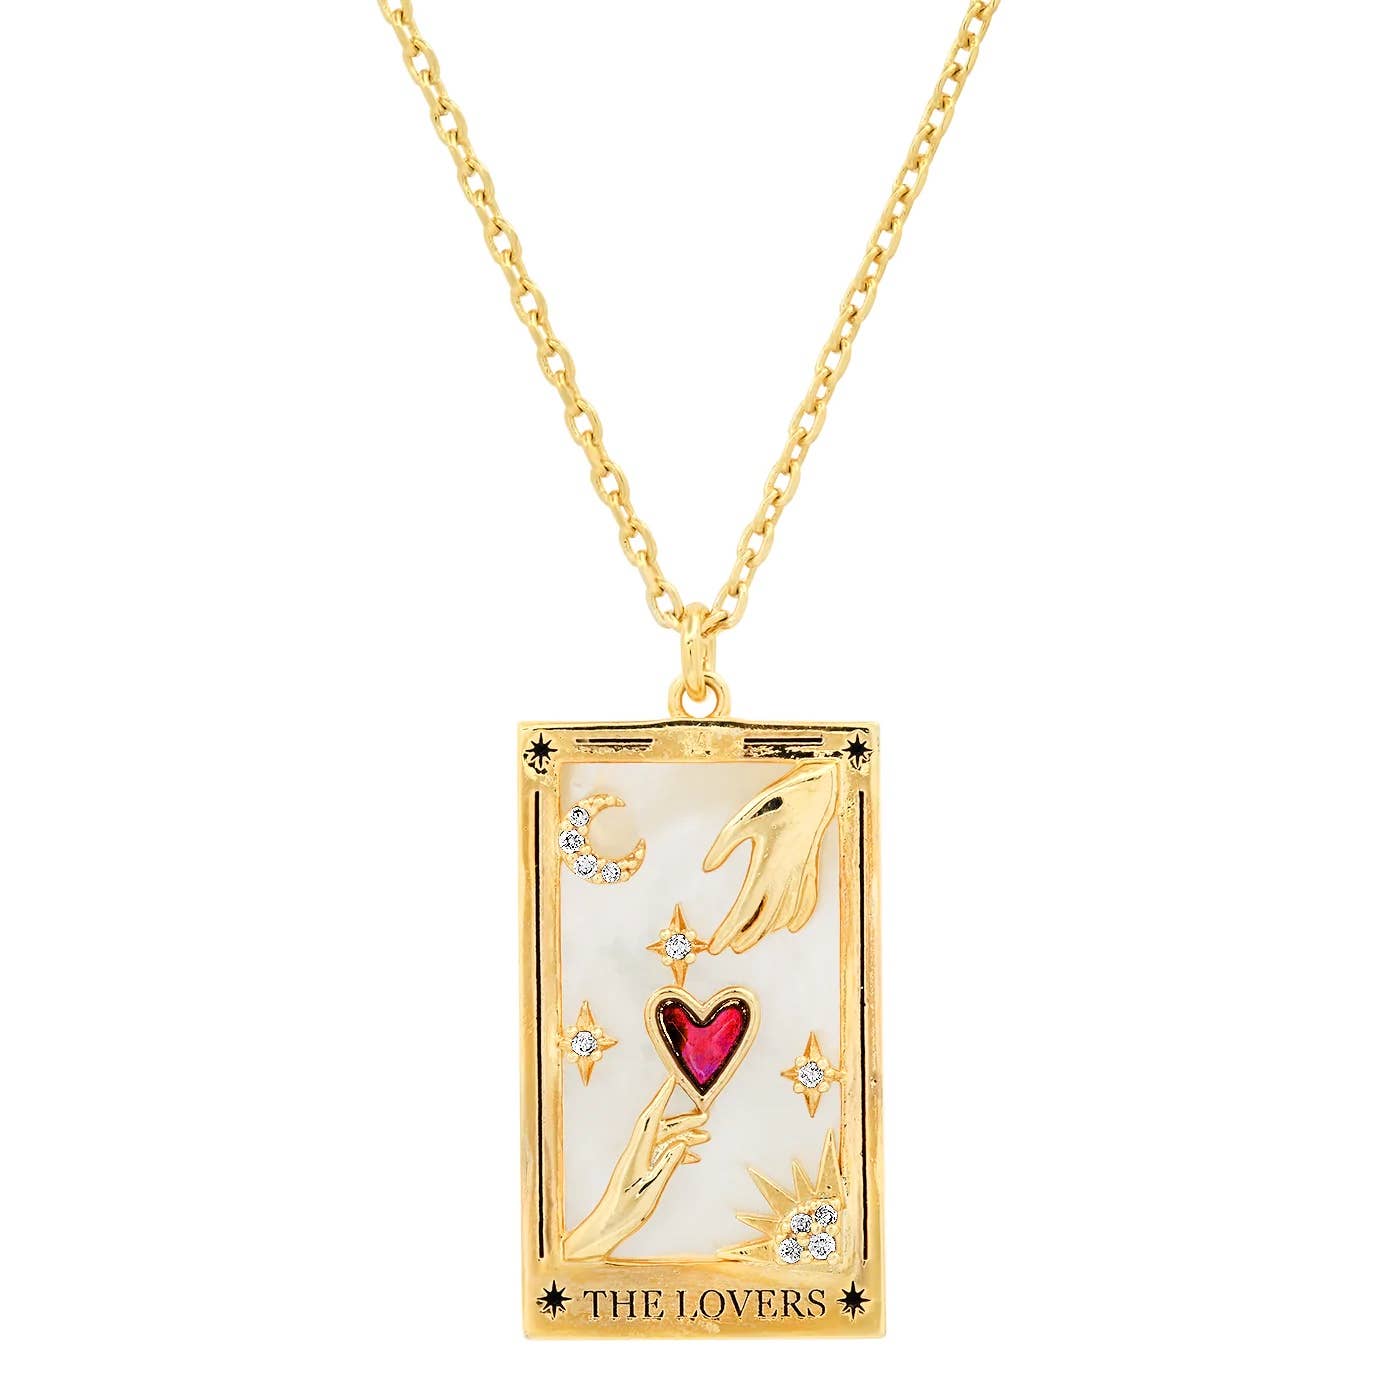 HoopLa Style - Tarot Card Necklace- The Lovers, The Magician, The Queen of Cups, The The Wheel Of Fortune